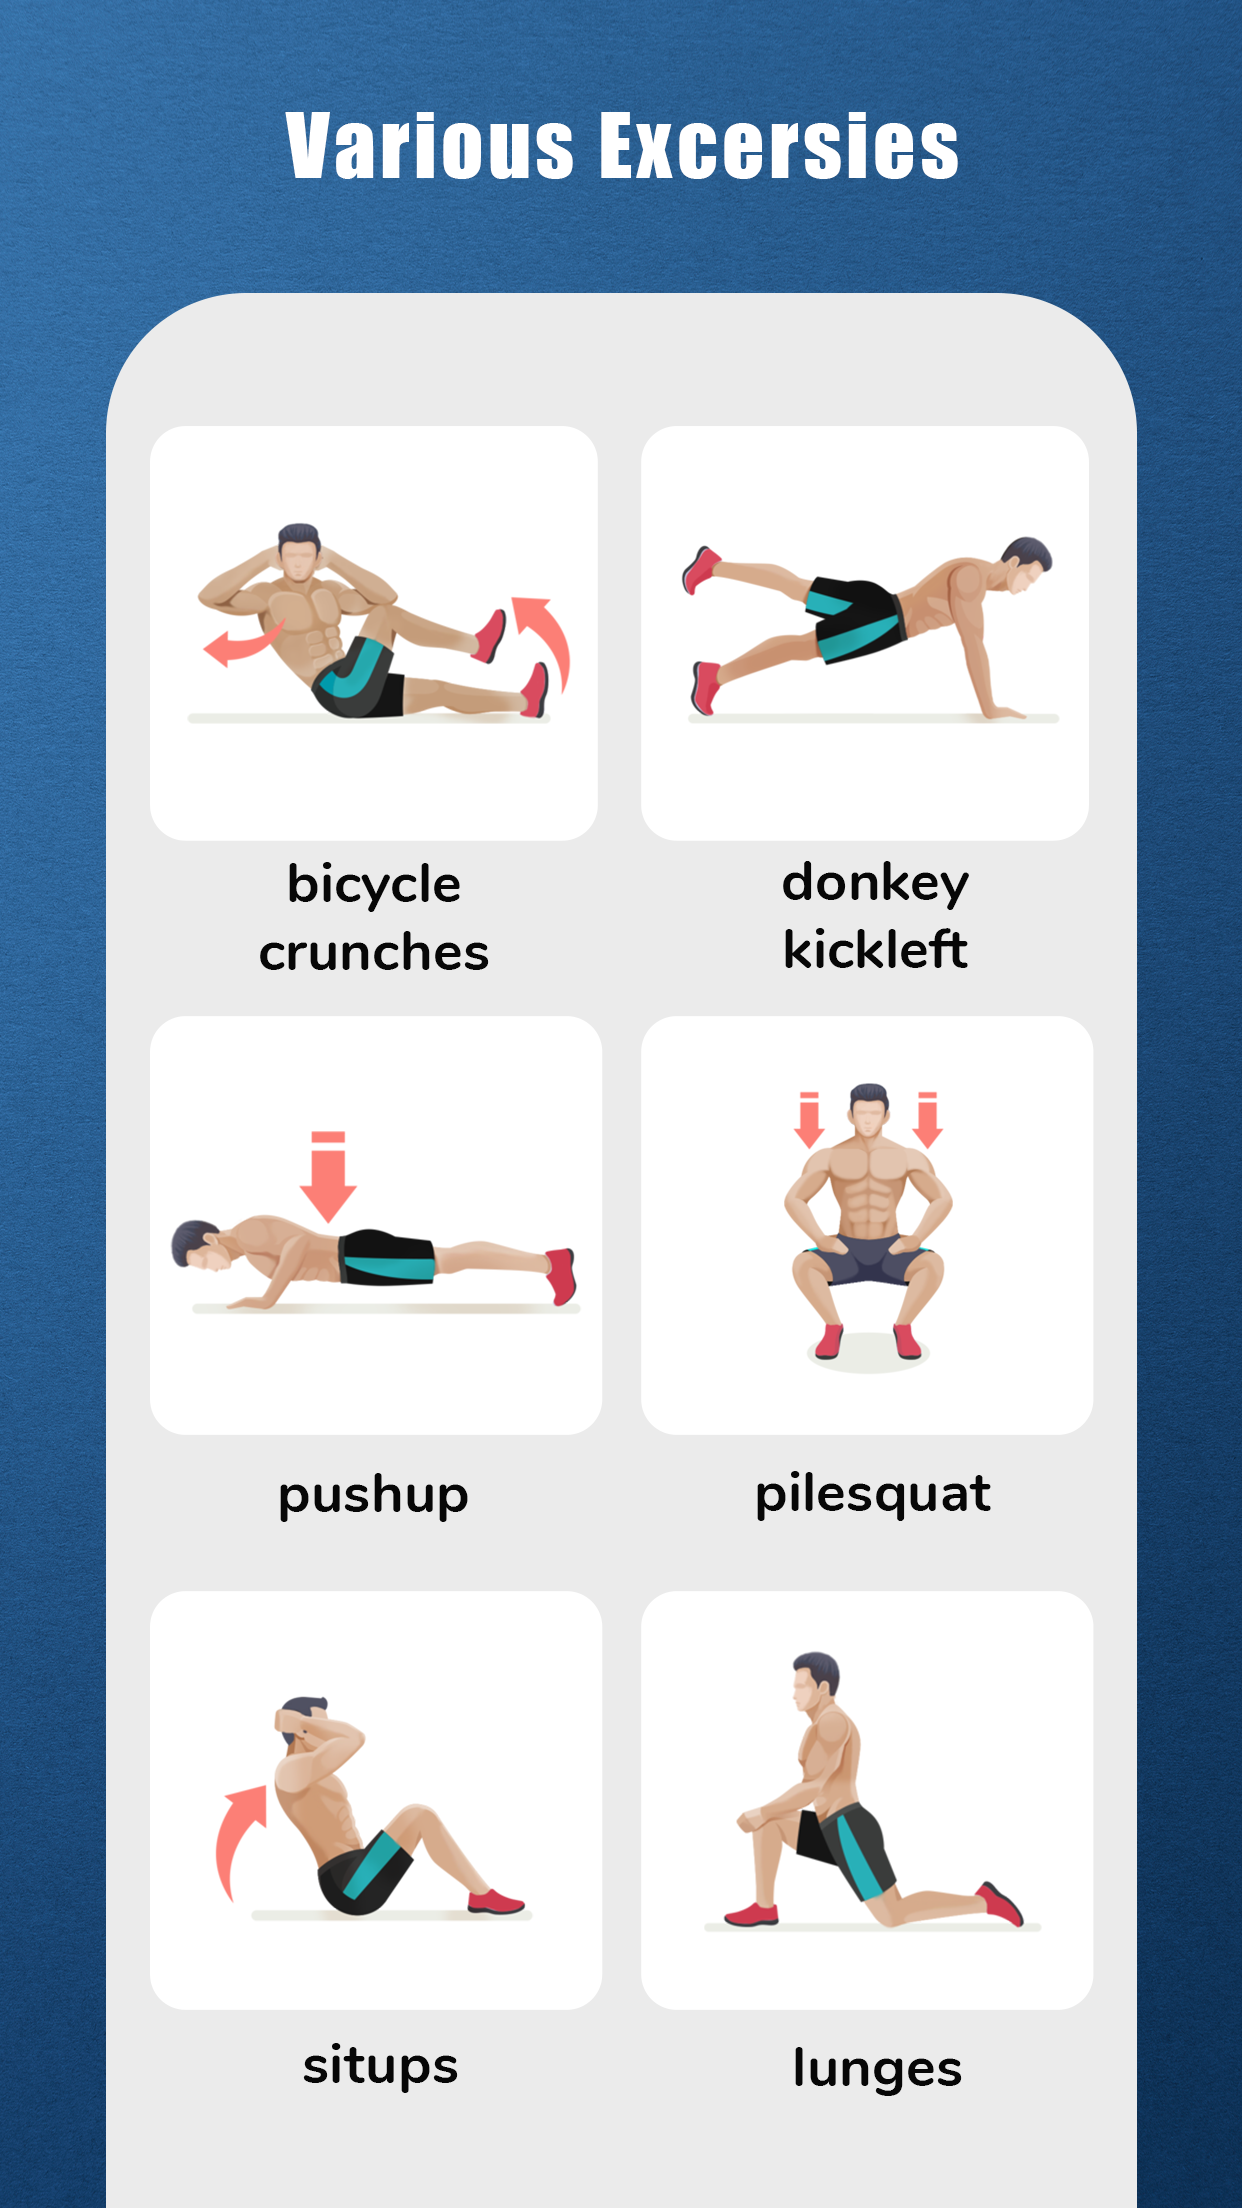 Home Workout for Men